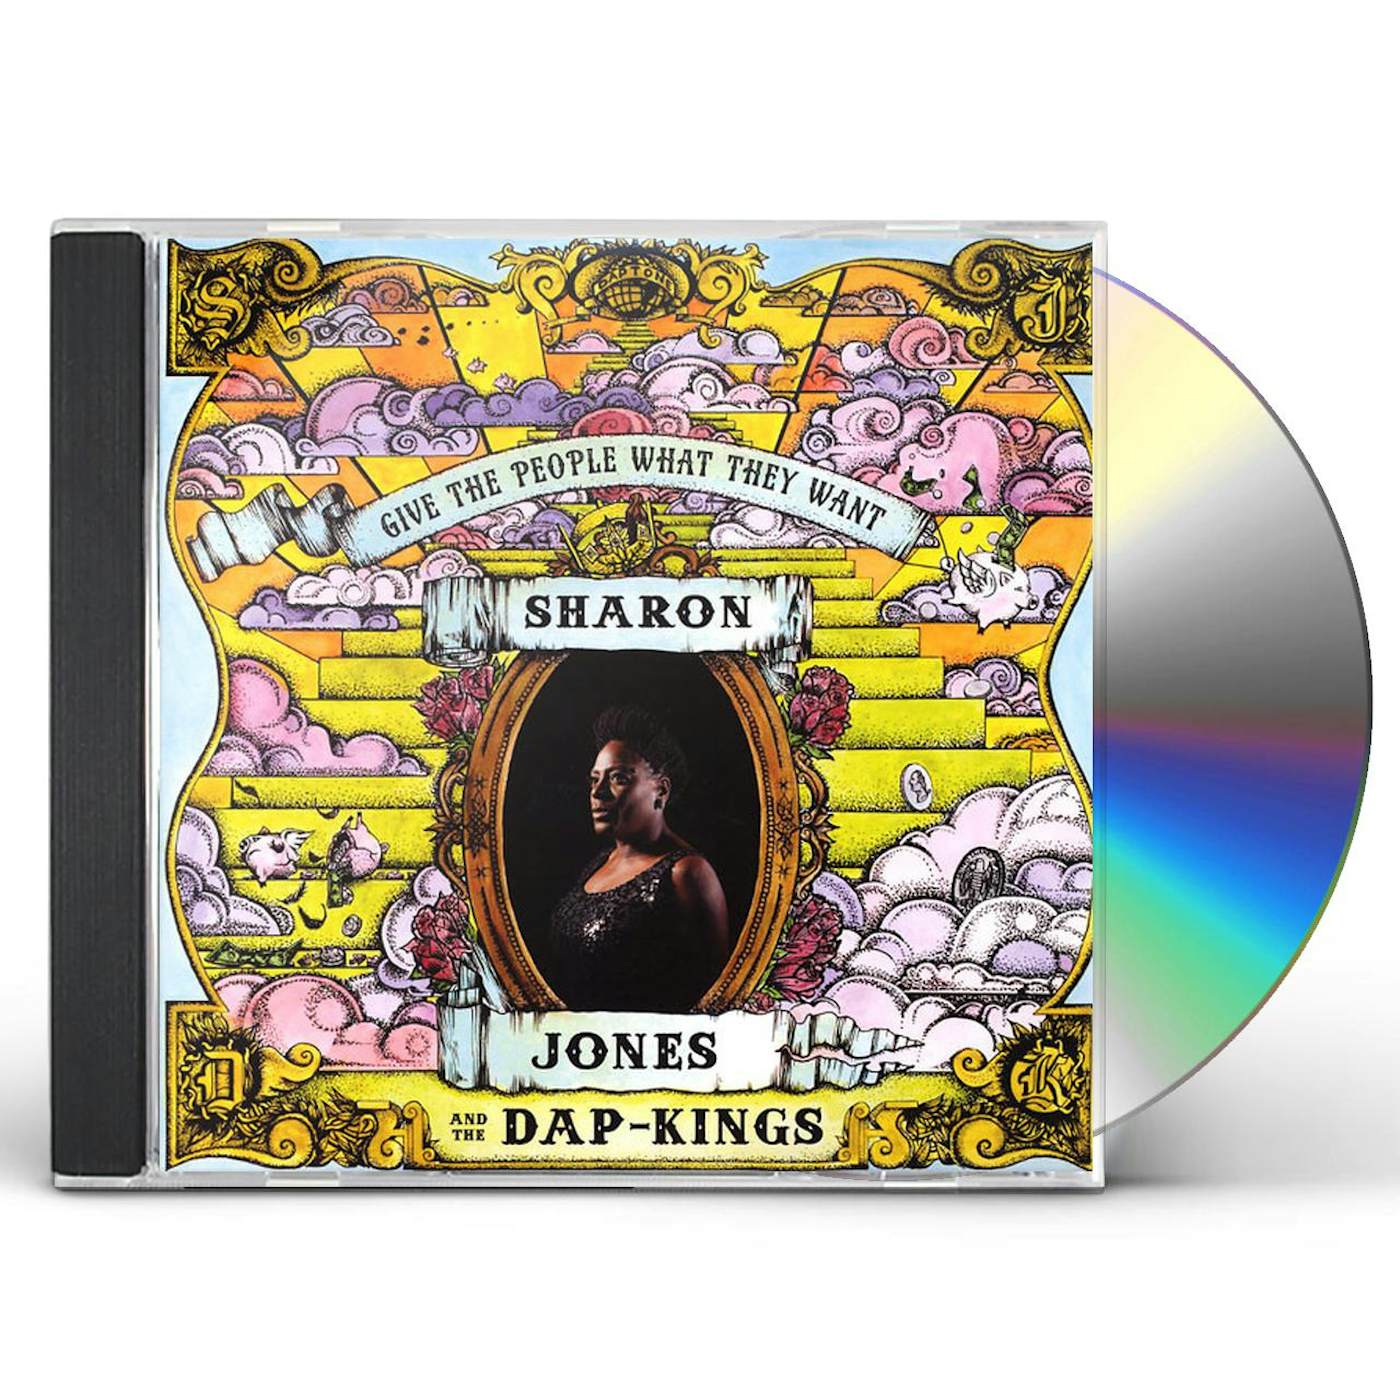 Sharon Jones & The Dap-Kings GIVE THE PEOPLE WHAT THEY WANT CD